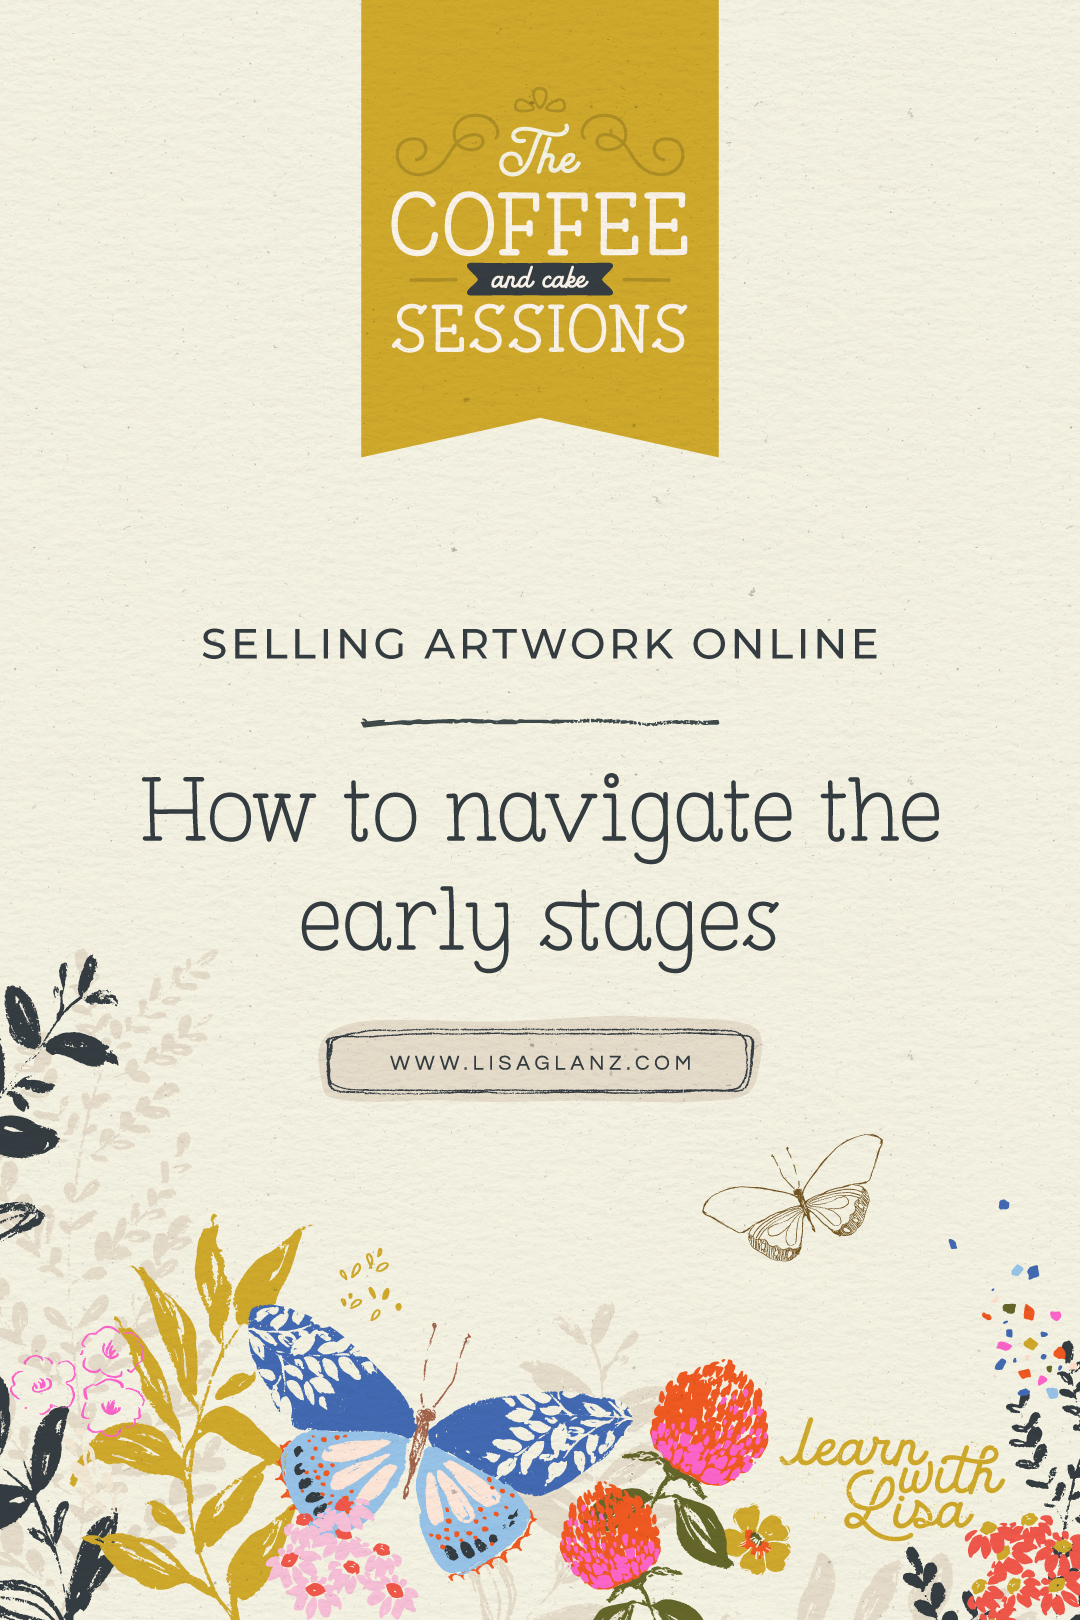 Selling artwork online: How to successfully navigate the early stages